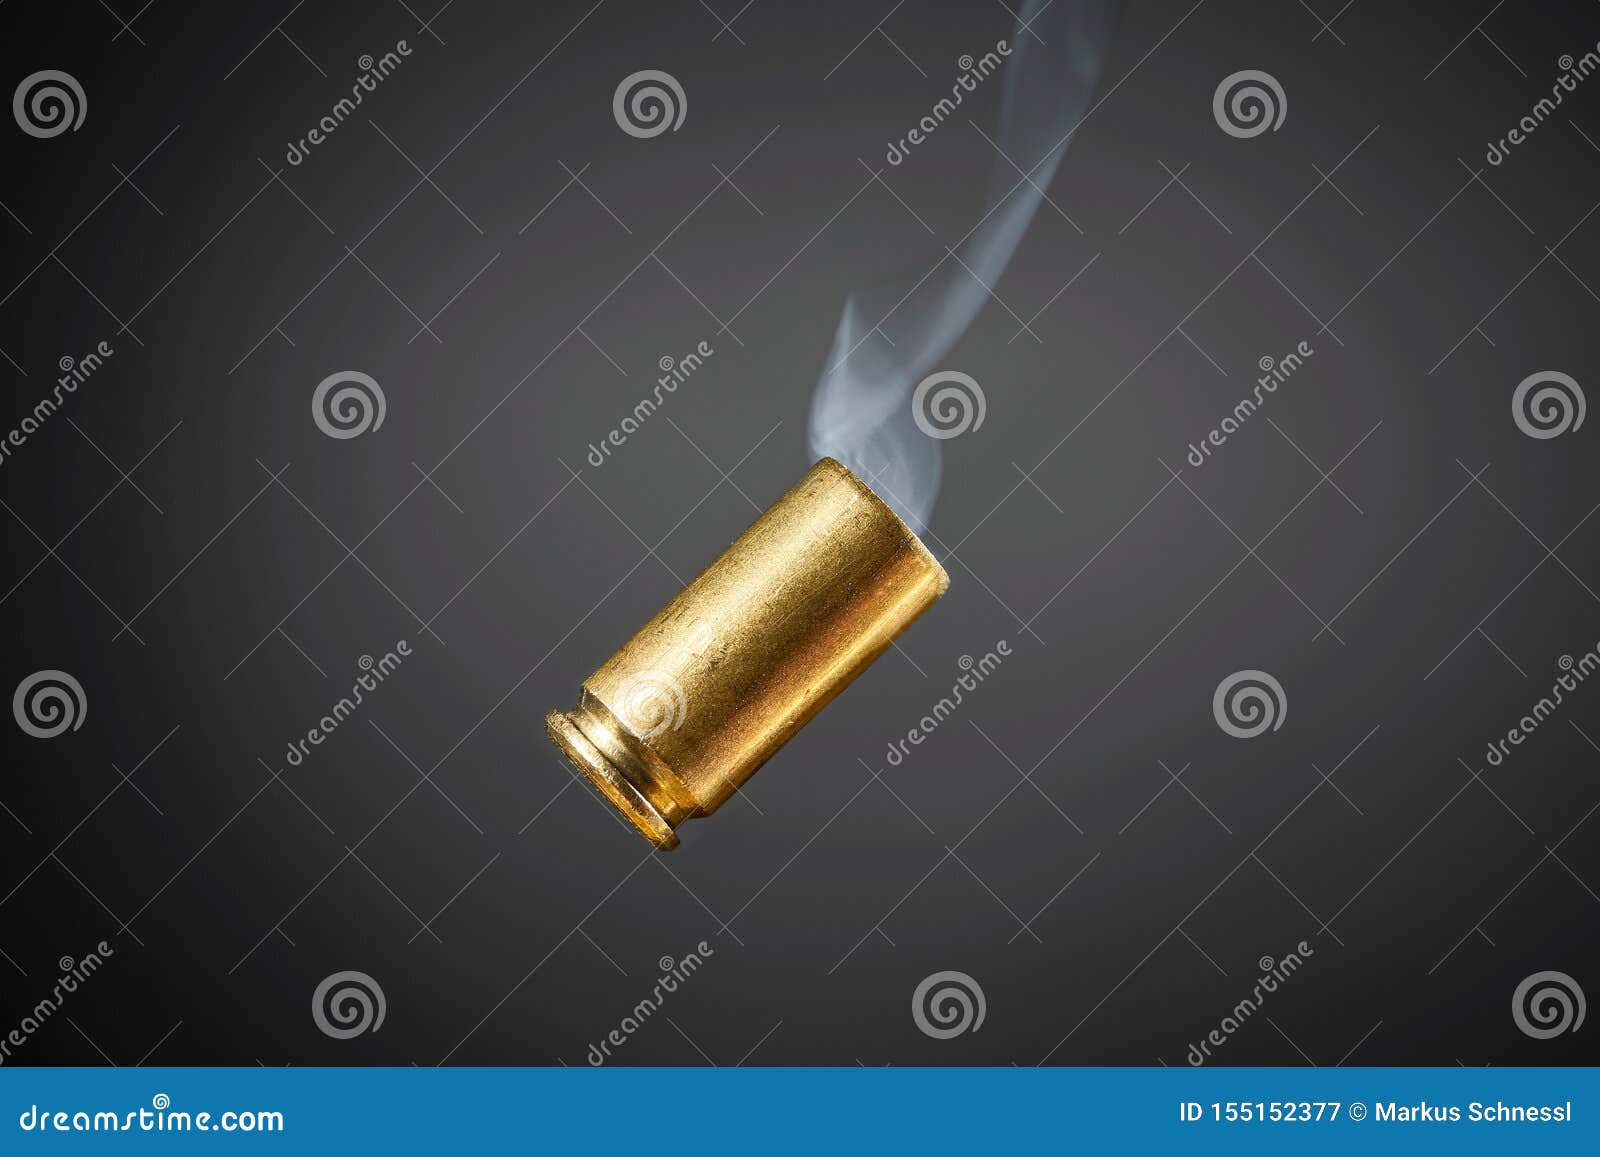 Smoking bullet casing stock image. Image of armory, shell - 155152377